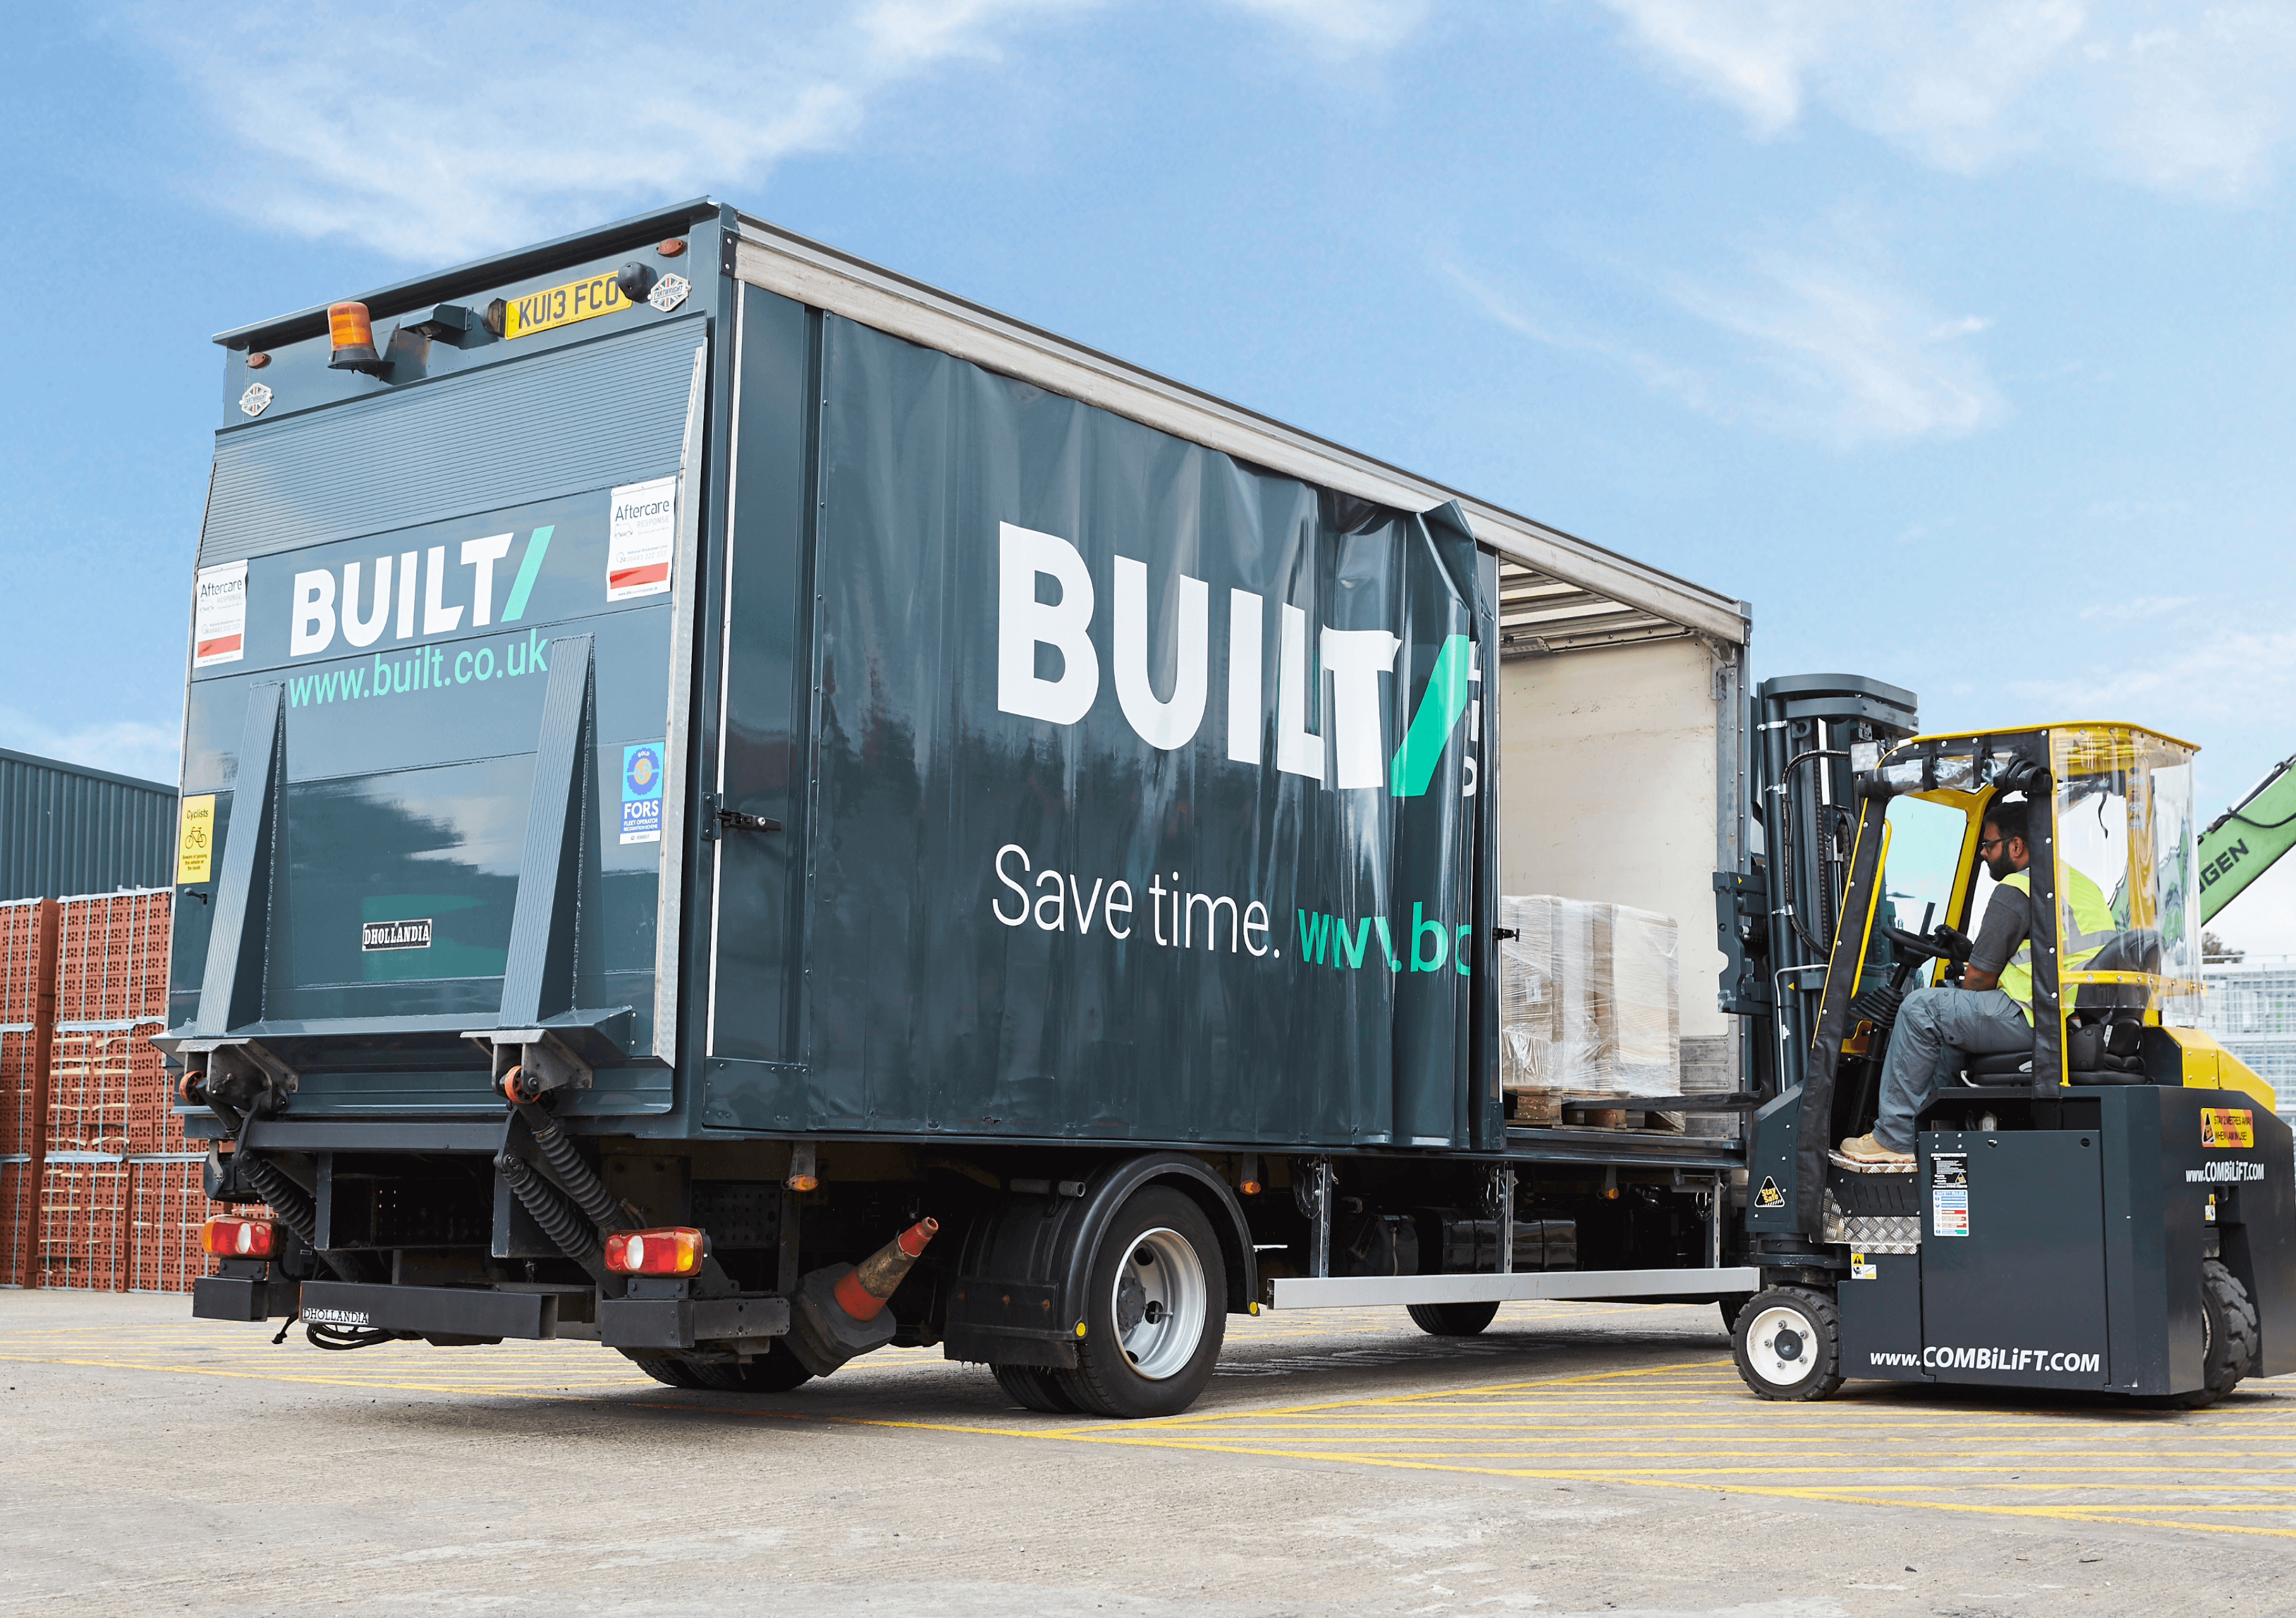 An image showing building supplies being loaded into a lorry with Built branding on the side